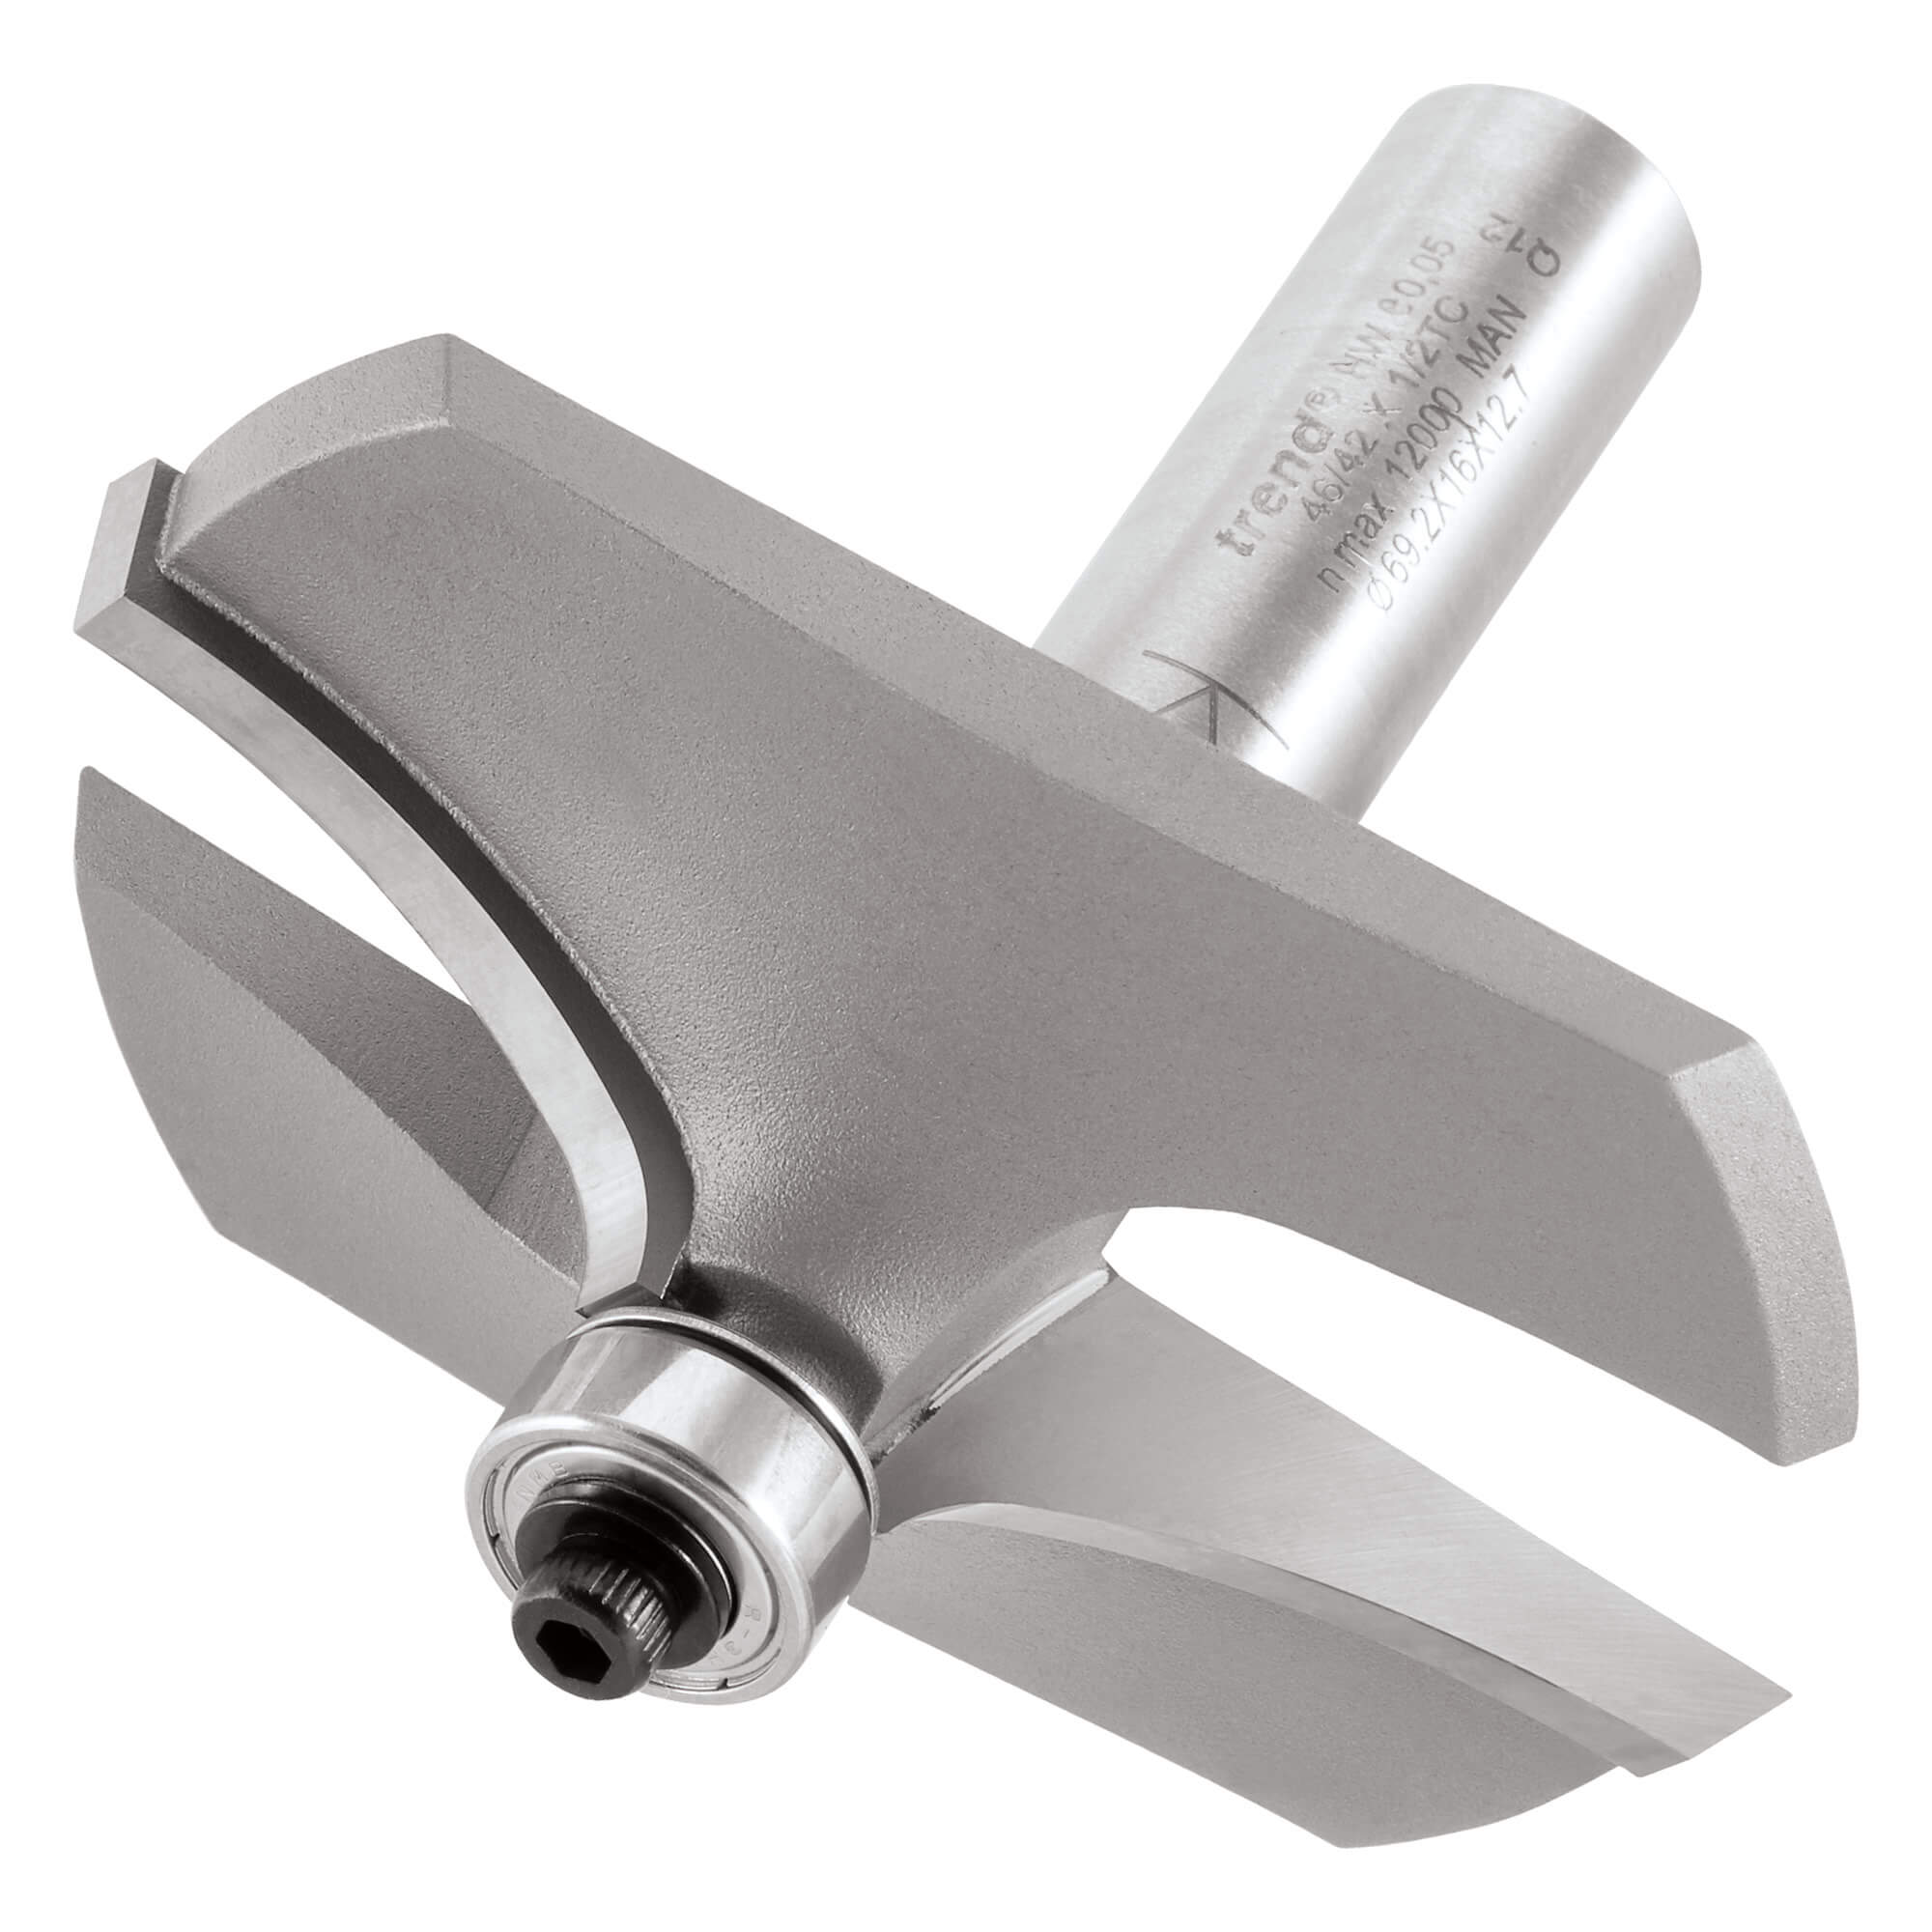 Image of Trend Bearing Guided Thumb and Hand Mould Router Cutter 69.2mm 16mm 1/2"